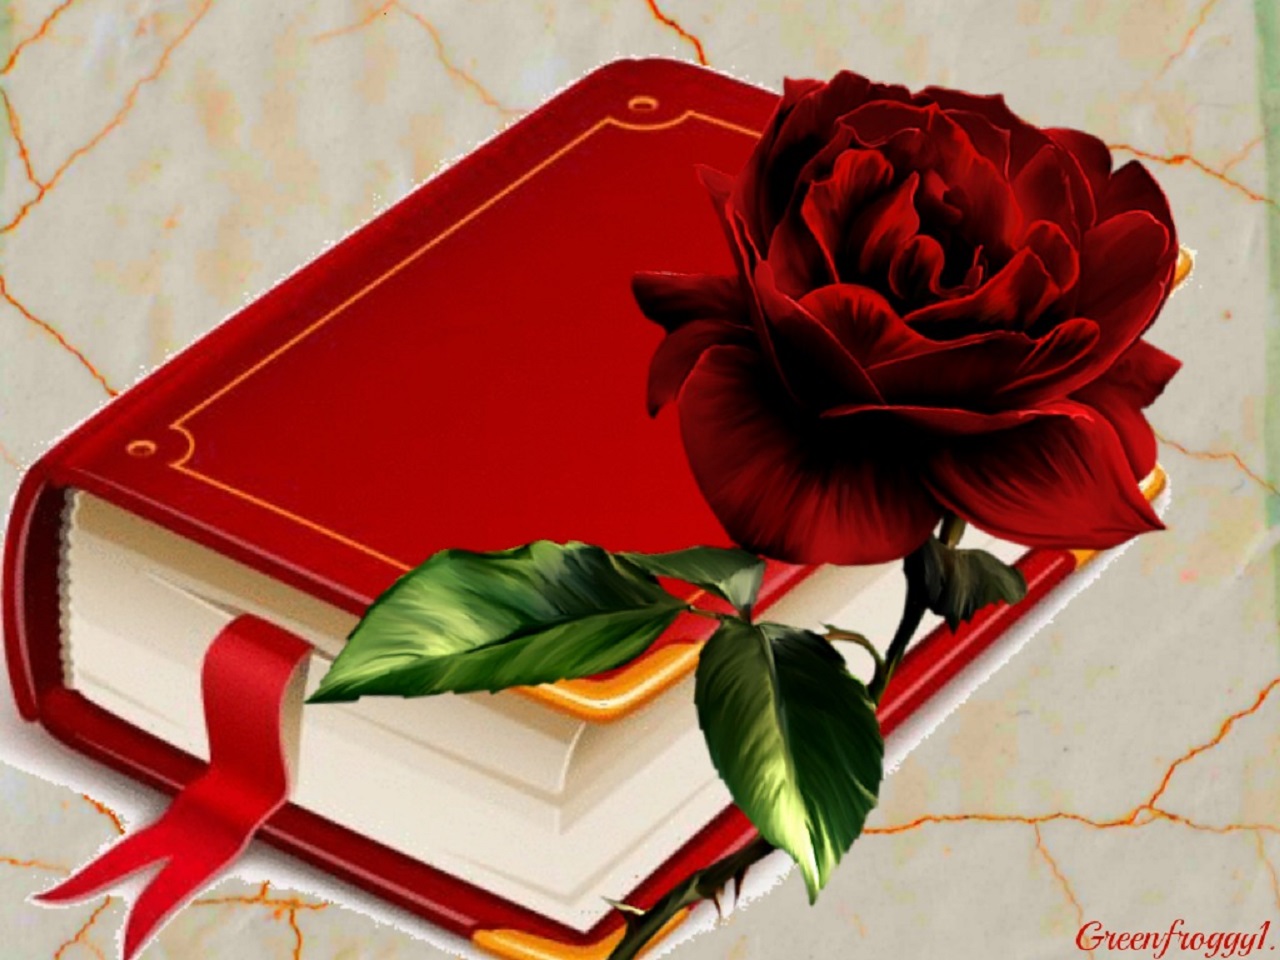 THE RED BOOK by GREENFROGGY1